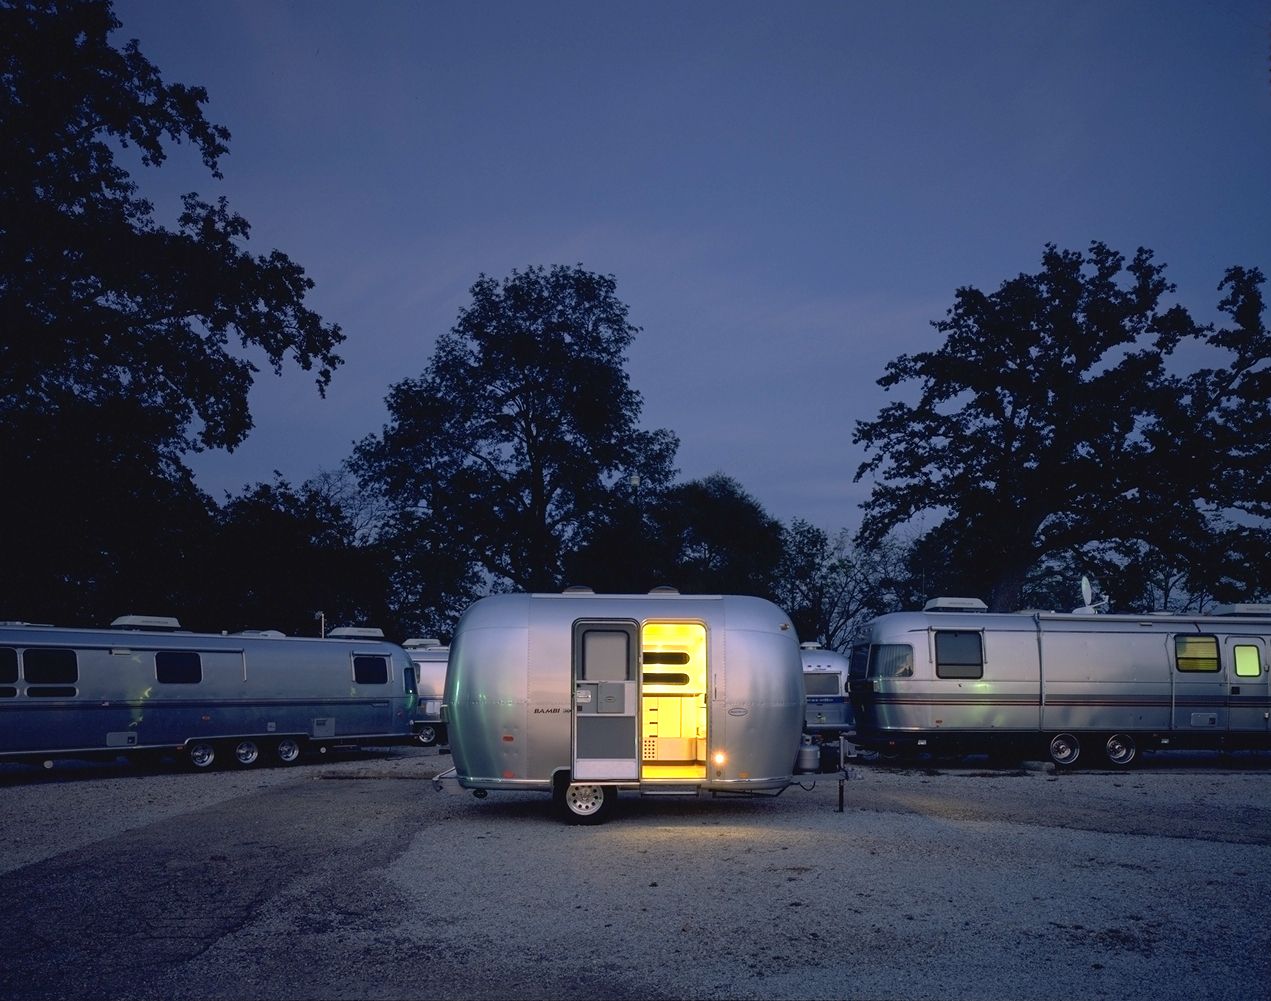 several airstreams side by side